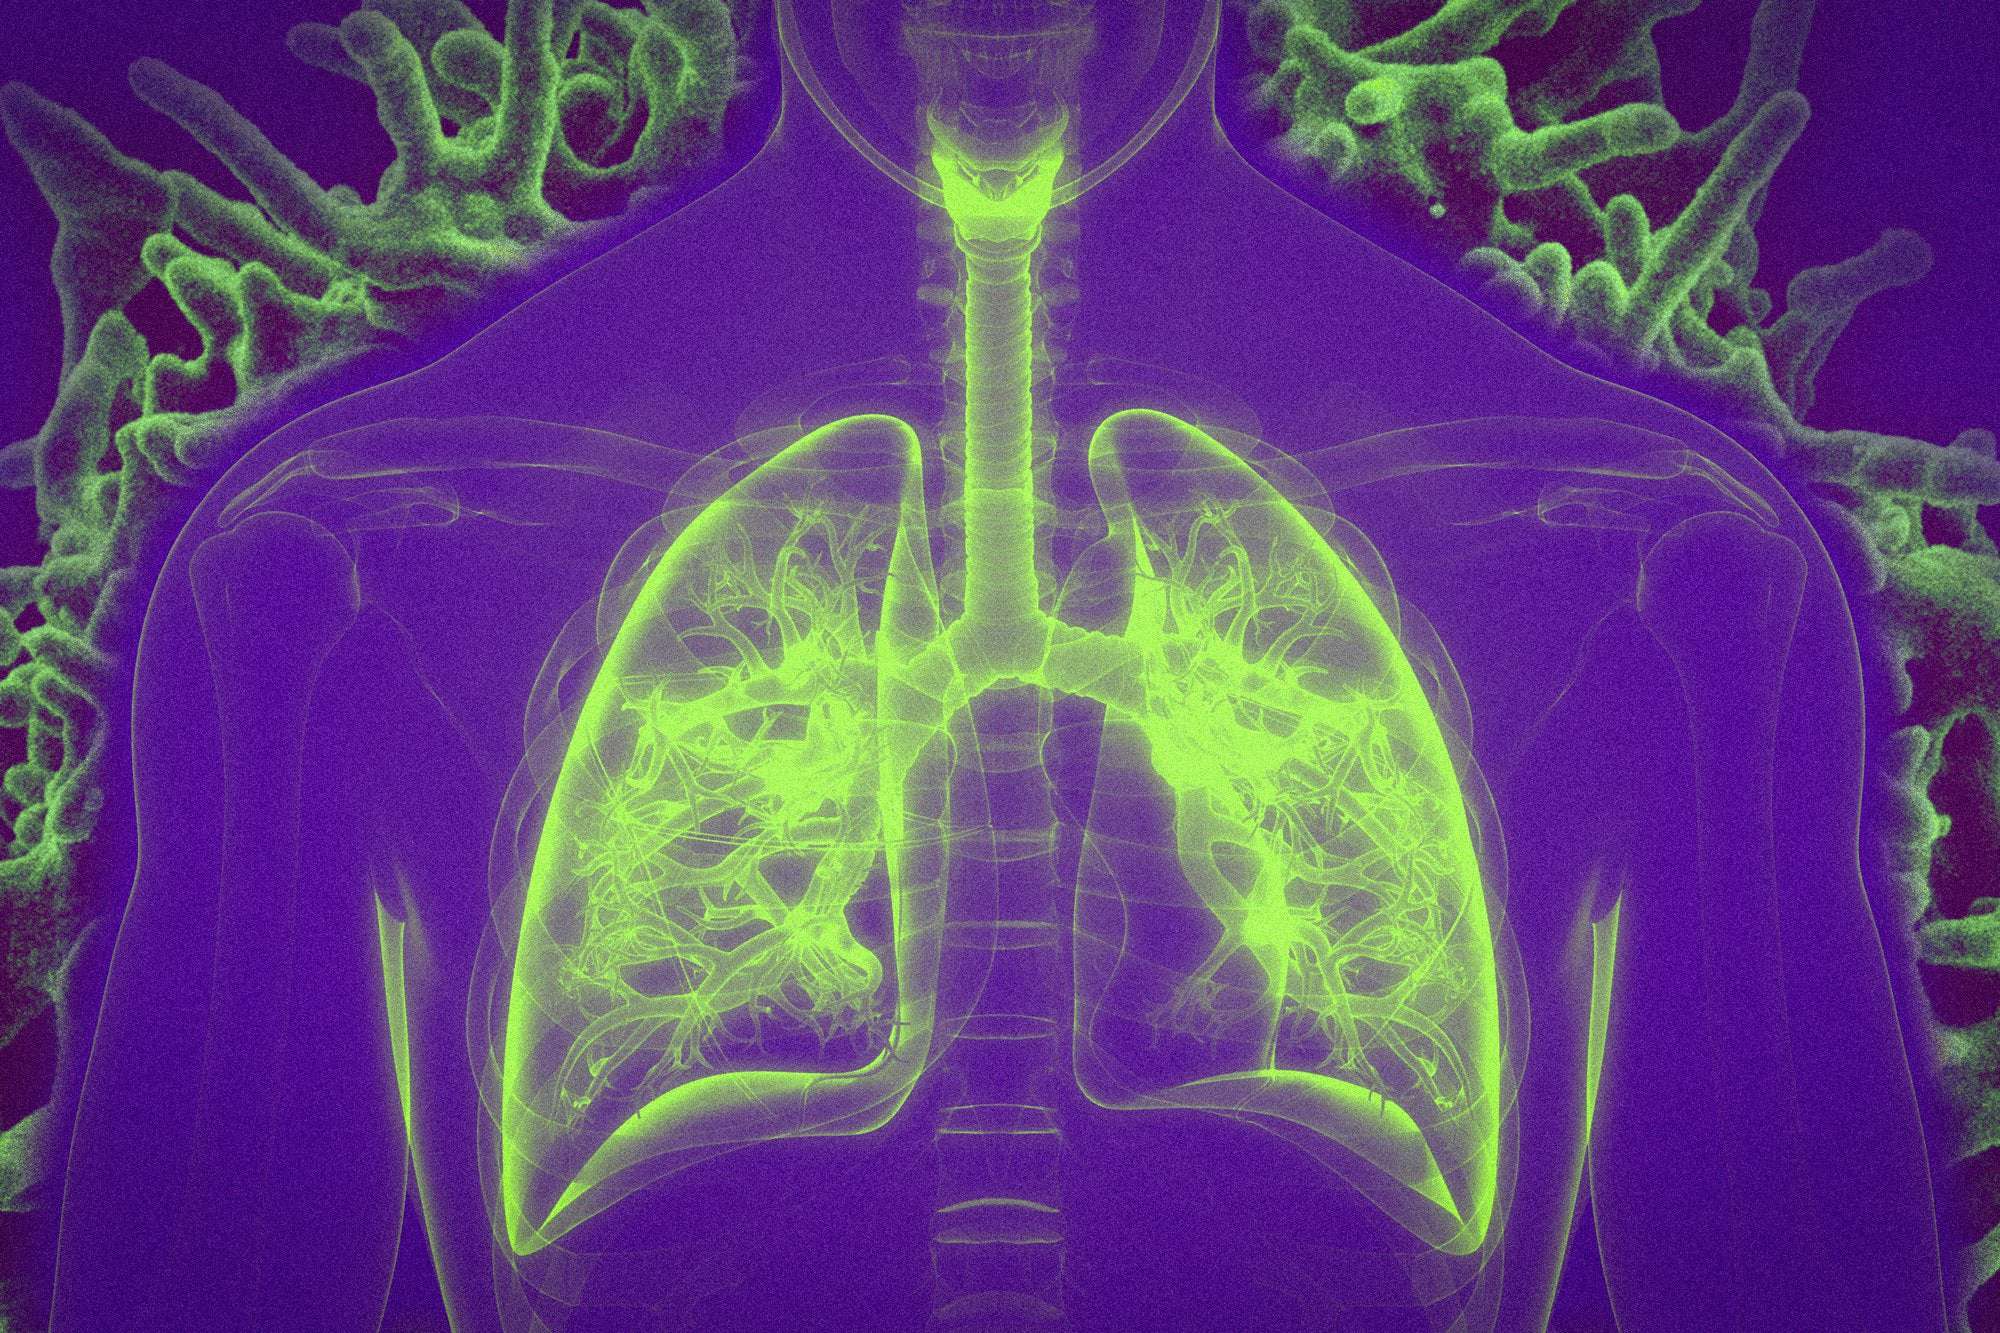 image for Vaccination by inhalation: MIT researchers delivered vaccines directly to the lungs boosting immune responses to viral infections or lung cancer. Vaccinated mice were able to eliminate metastatic melanoma, and the vaccine helped to shrink existing lung tumors. (Science Immunology, 19 Mar 2021)